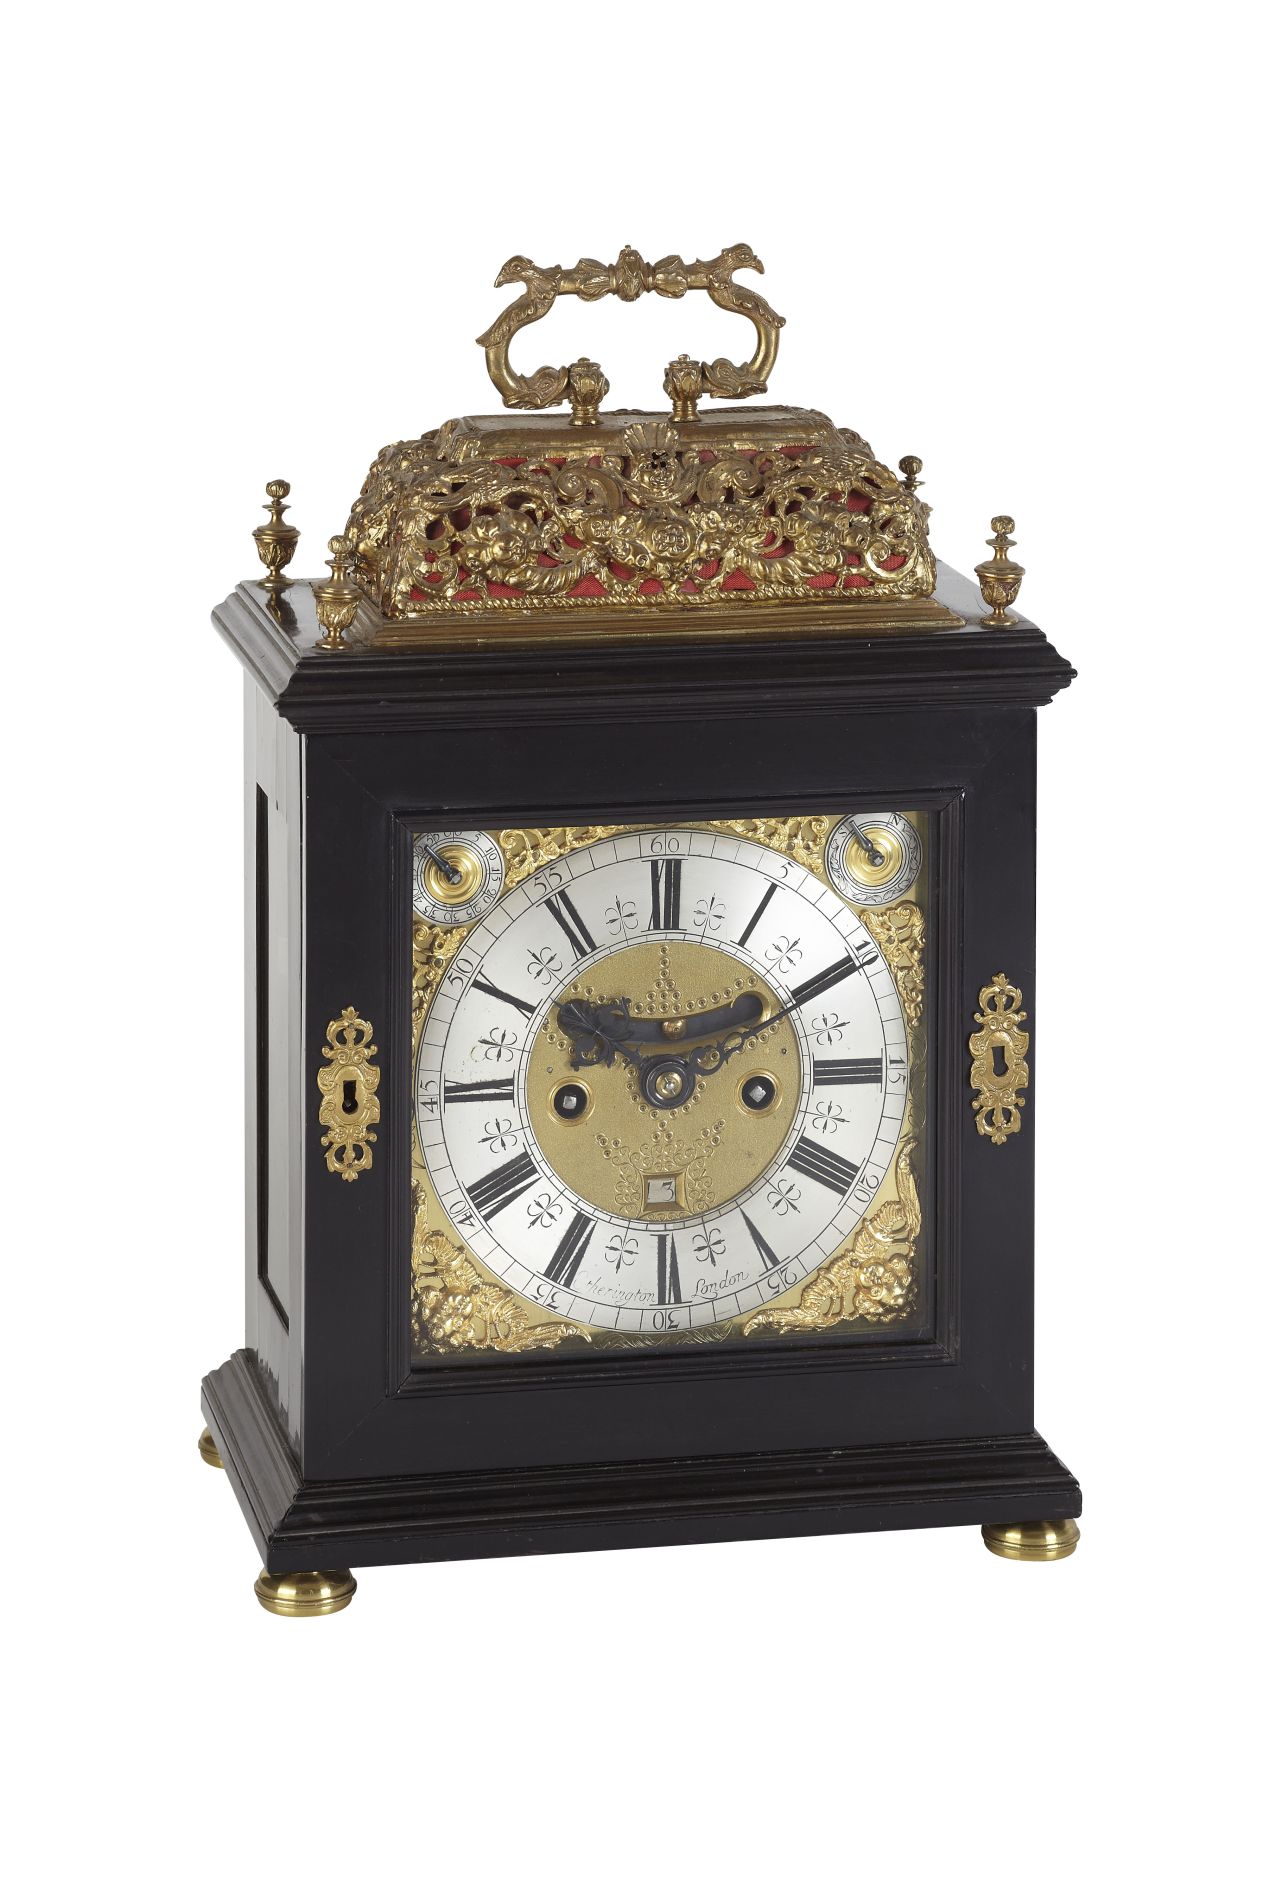 WILLIAM AND MARY EBONISED AND REPOUSSE BRASS MOUNTED BRACKET CLOCK BY GEORGE ETHERINGTON, LONDON